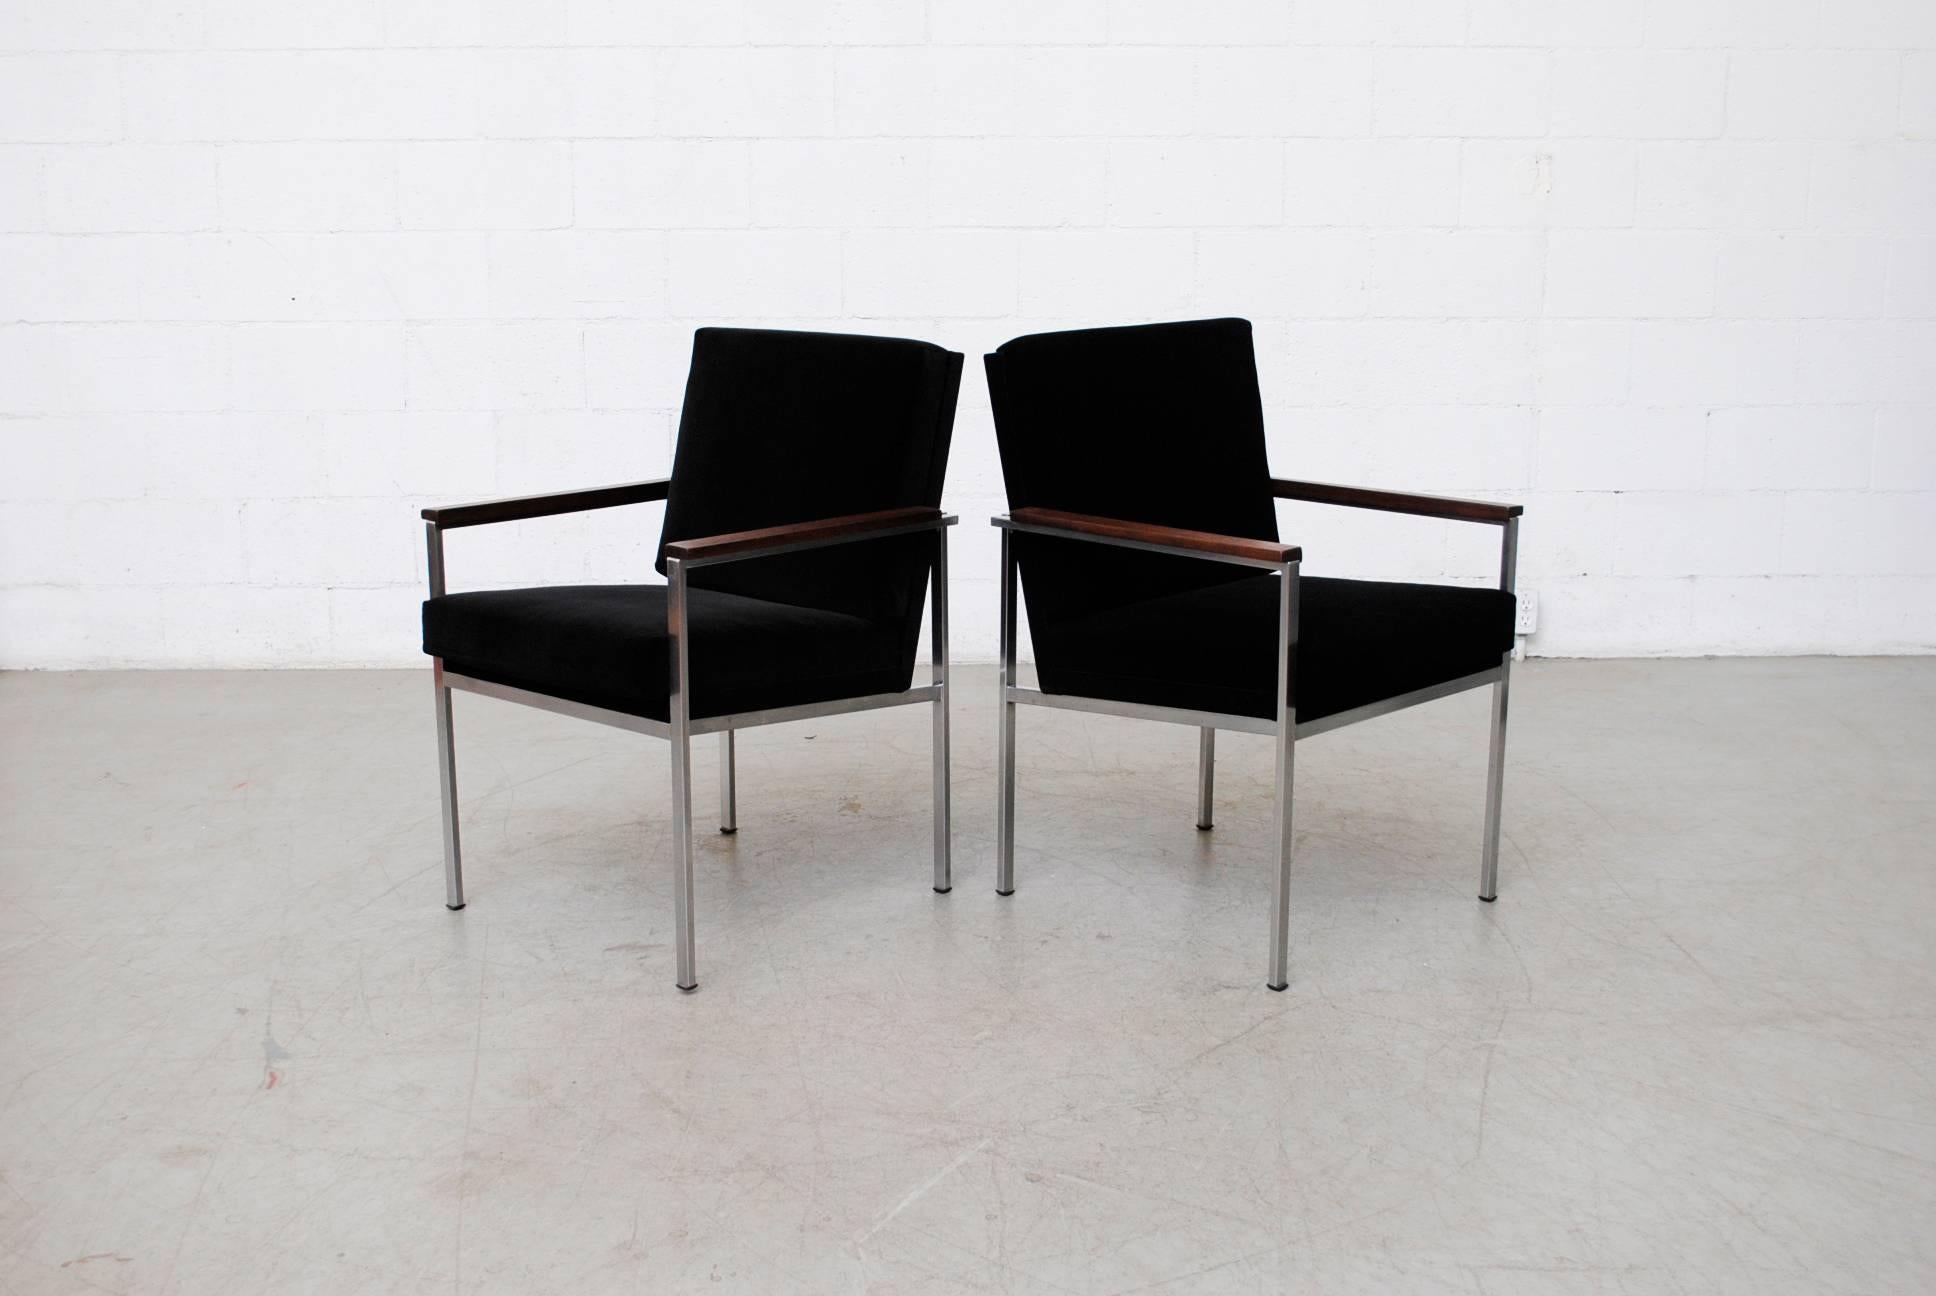 Pair of handsome architectural chrome framed arm chairs with new black velvet upholstered seating and teak armrests. Good original condition, some wear to frame. Set price.